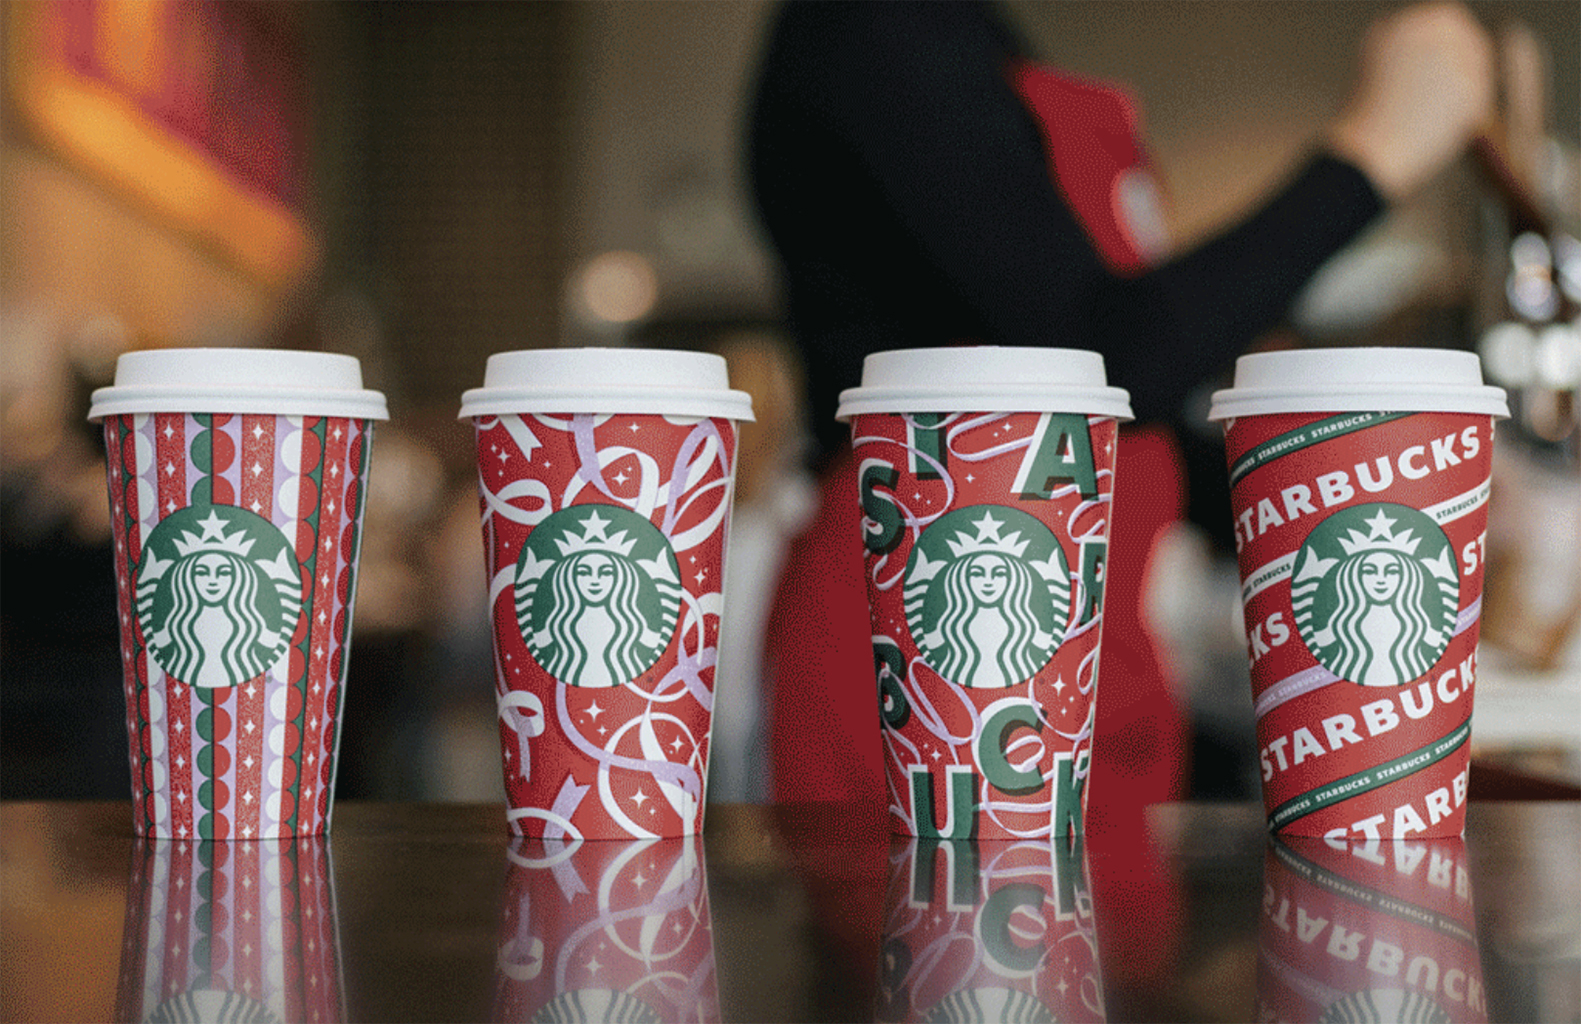 https://akns-images.eonline.com/eol_images/Entire_Site/2021103/rs_1581x1024-211103091444-1024-Starbucks-Holiday-Cups.jpg?fit=around%7C1581:1024&output-quality=90&crop=1581:1024;center,top